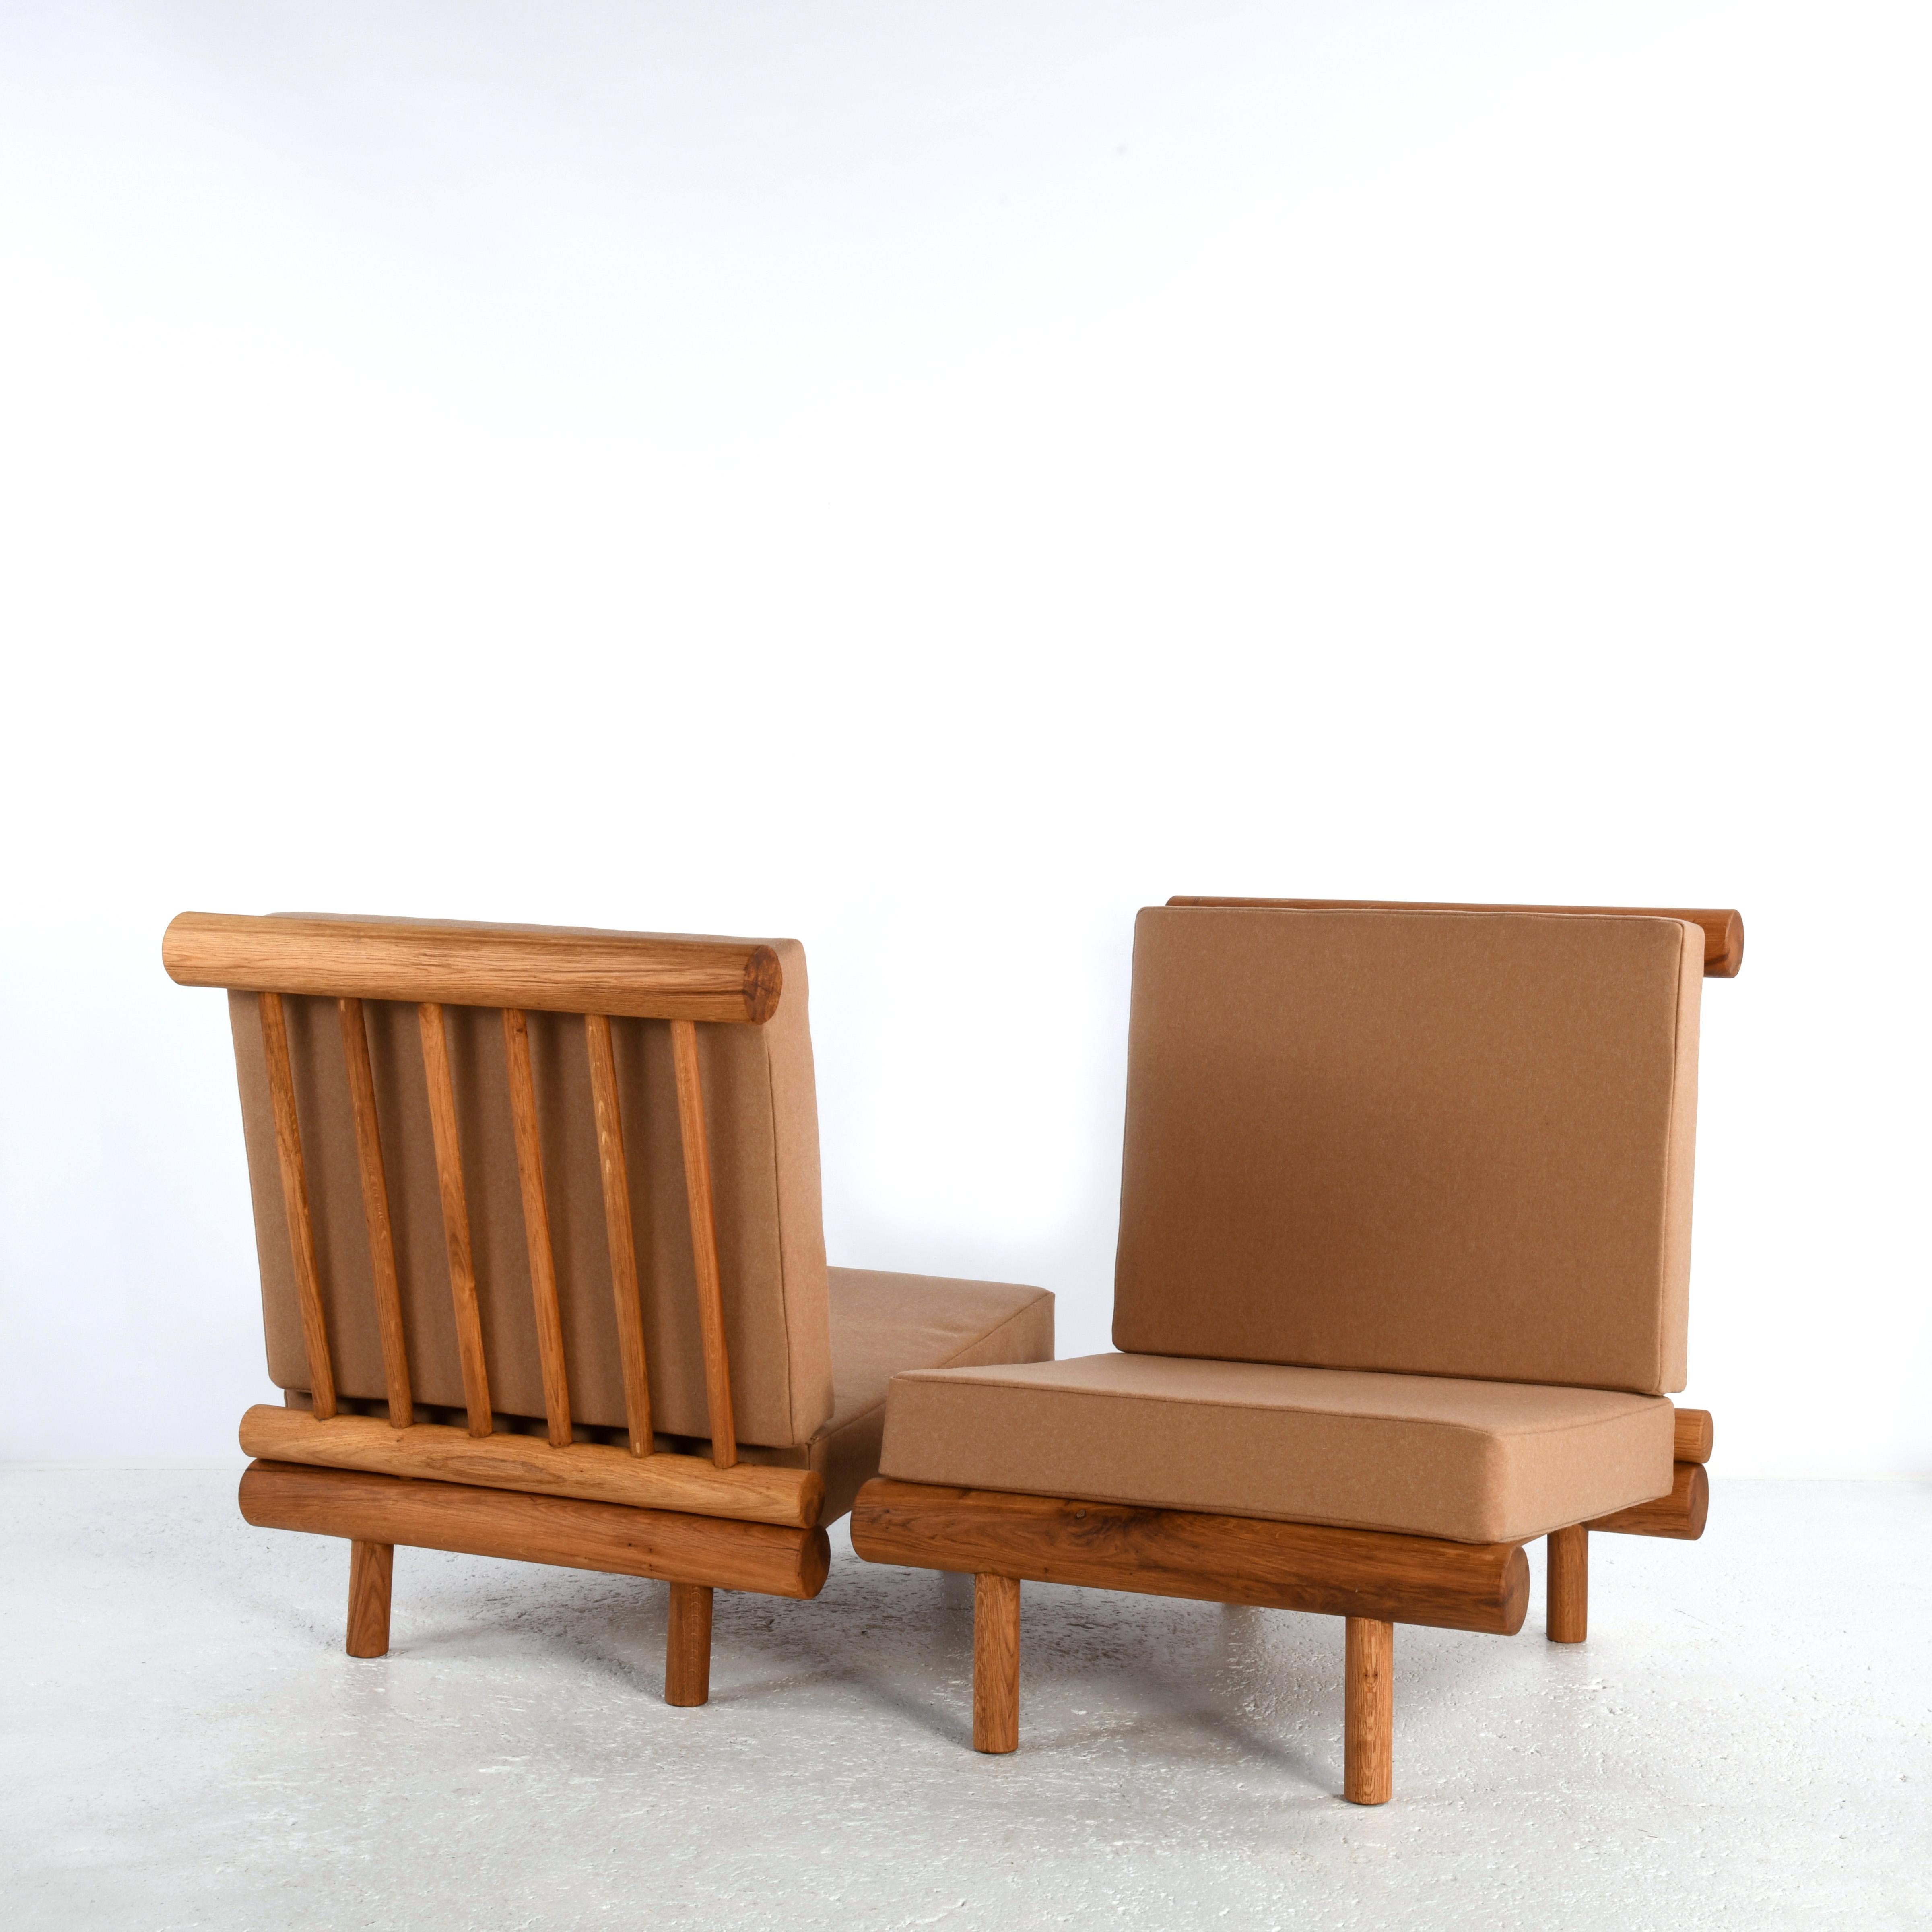 Mid-Century Modern Pair of oak fireside chairs called La cachette, attributed to Charlotte Perriand